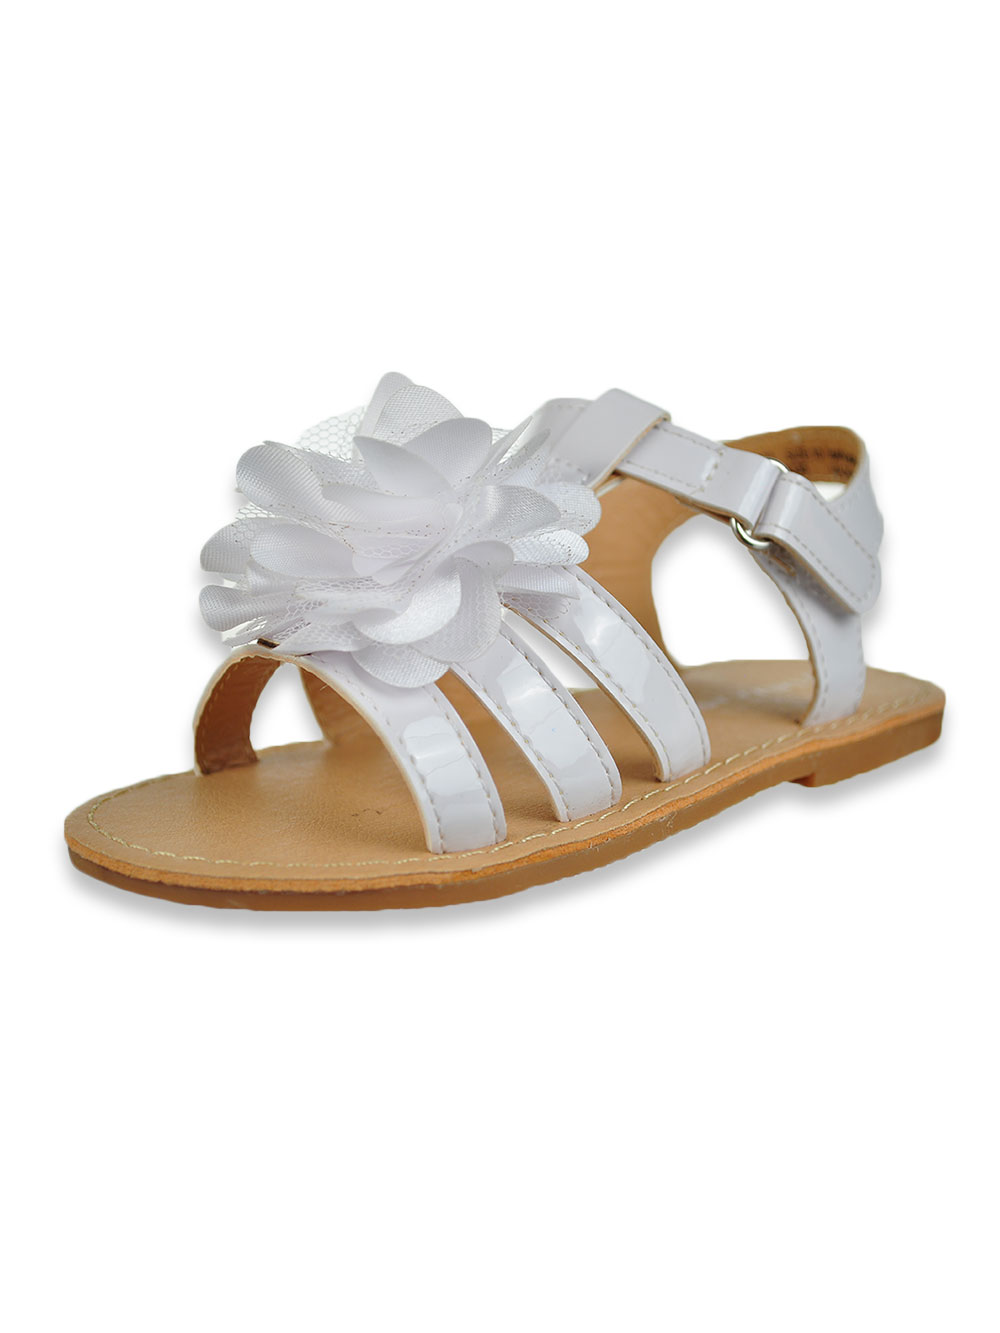 White and Multicolor Sandals